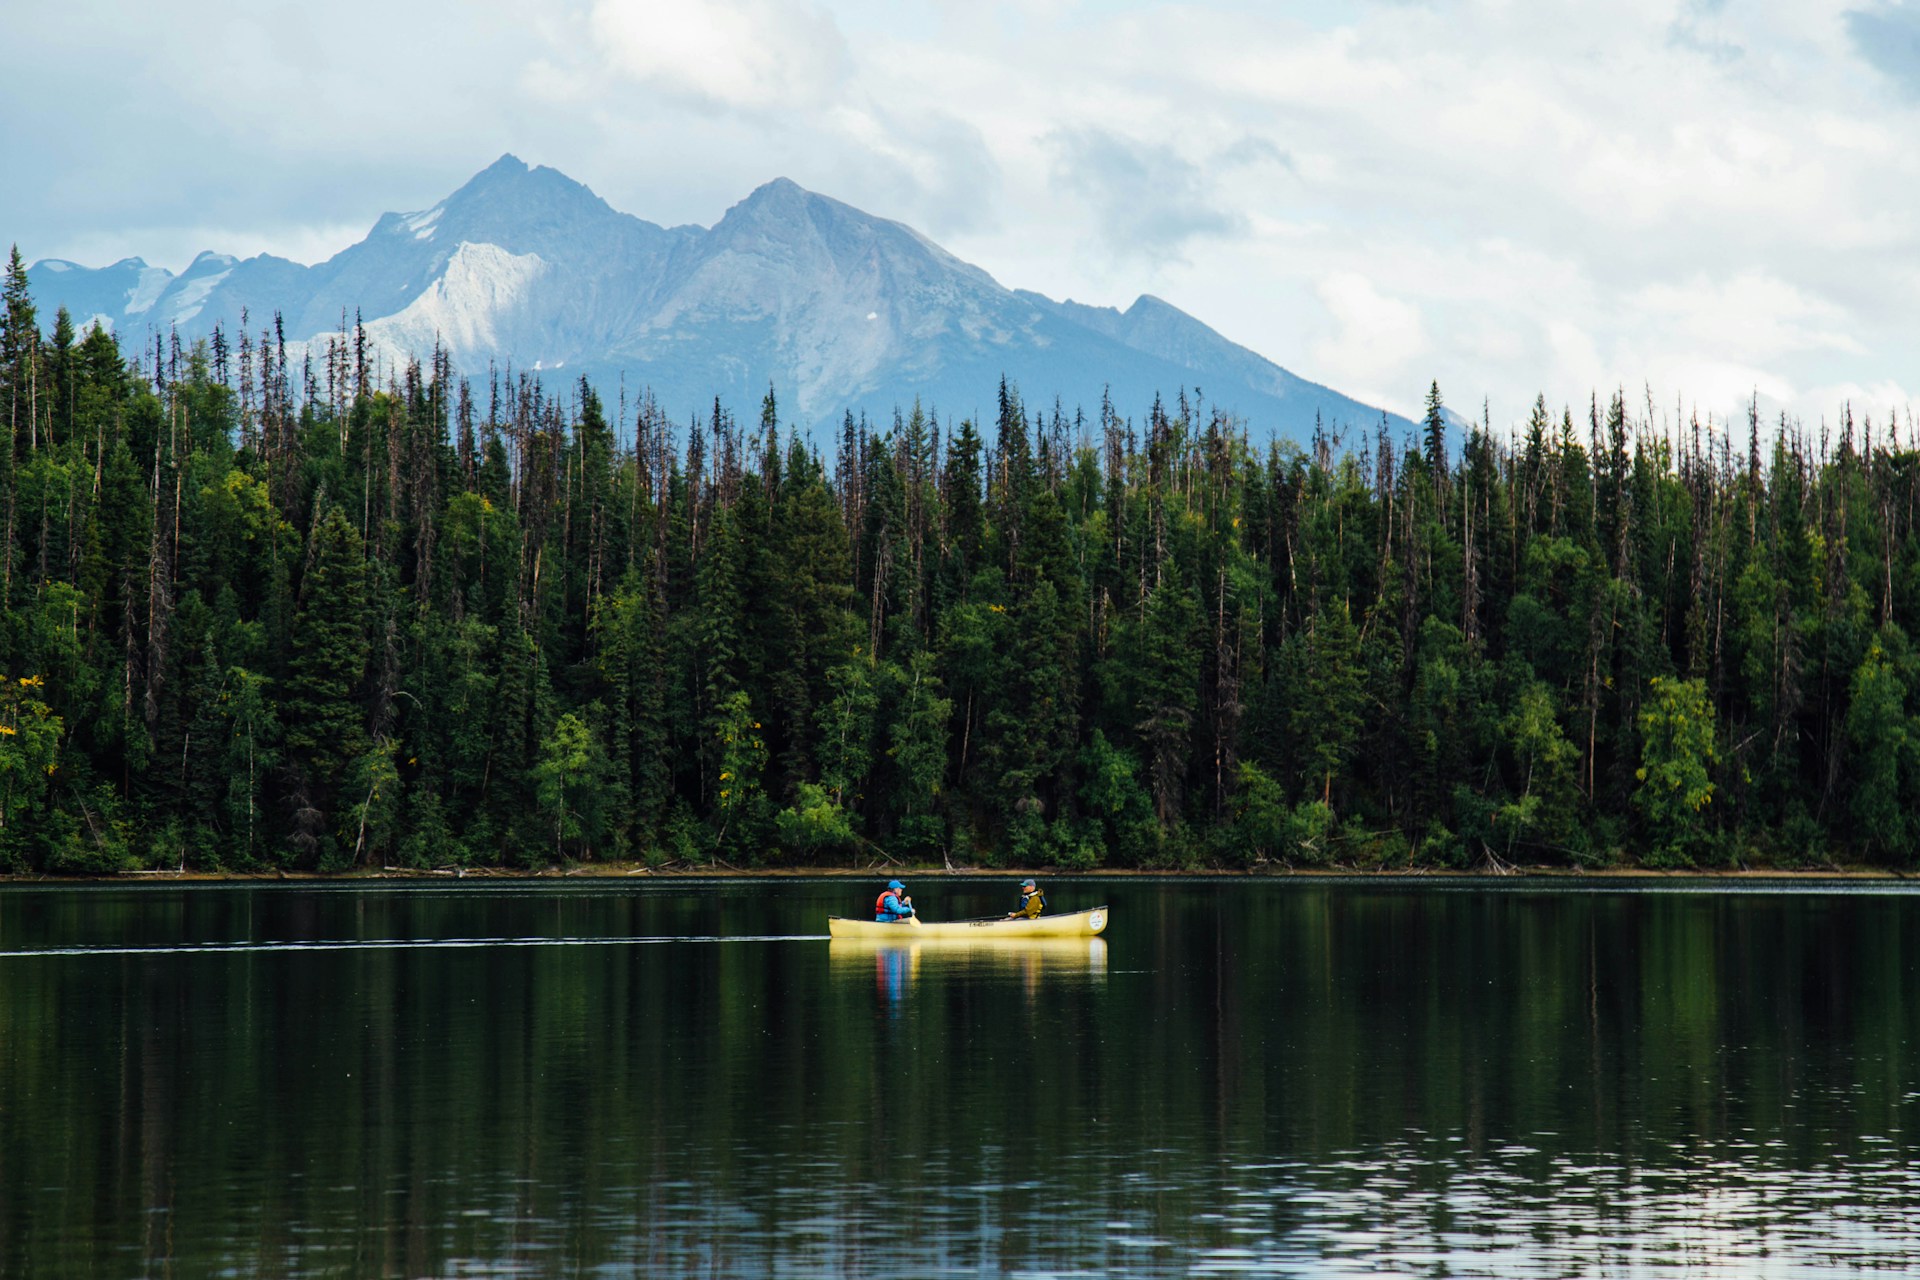 Two people in a yellow boat sailing near pine trees during daytime at Bowron Lake, B.C.